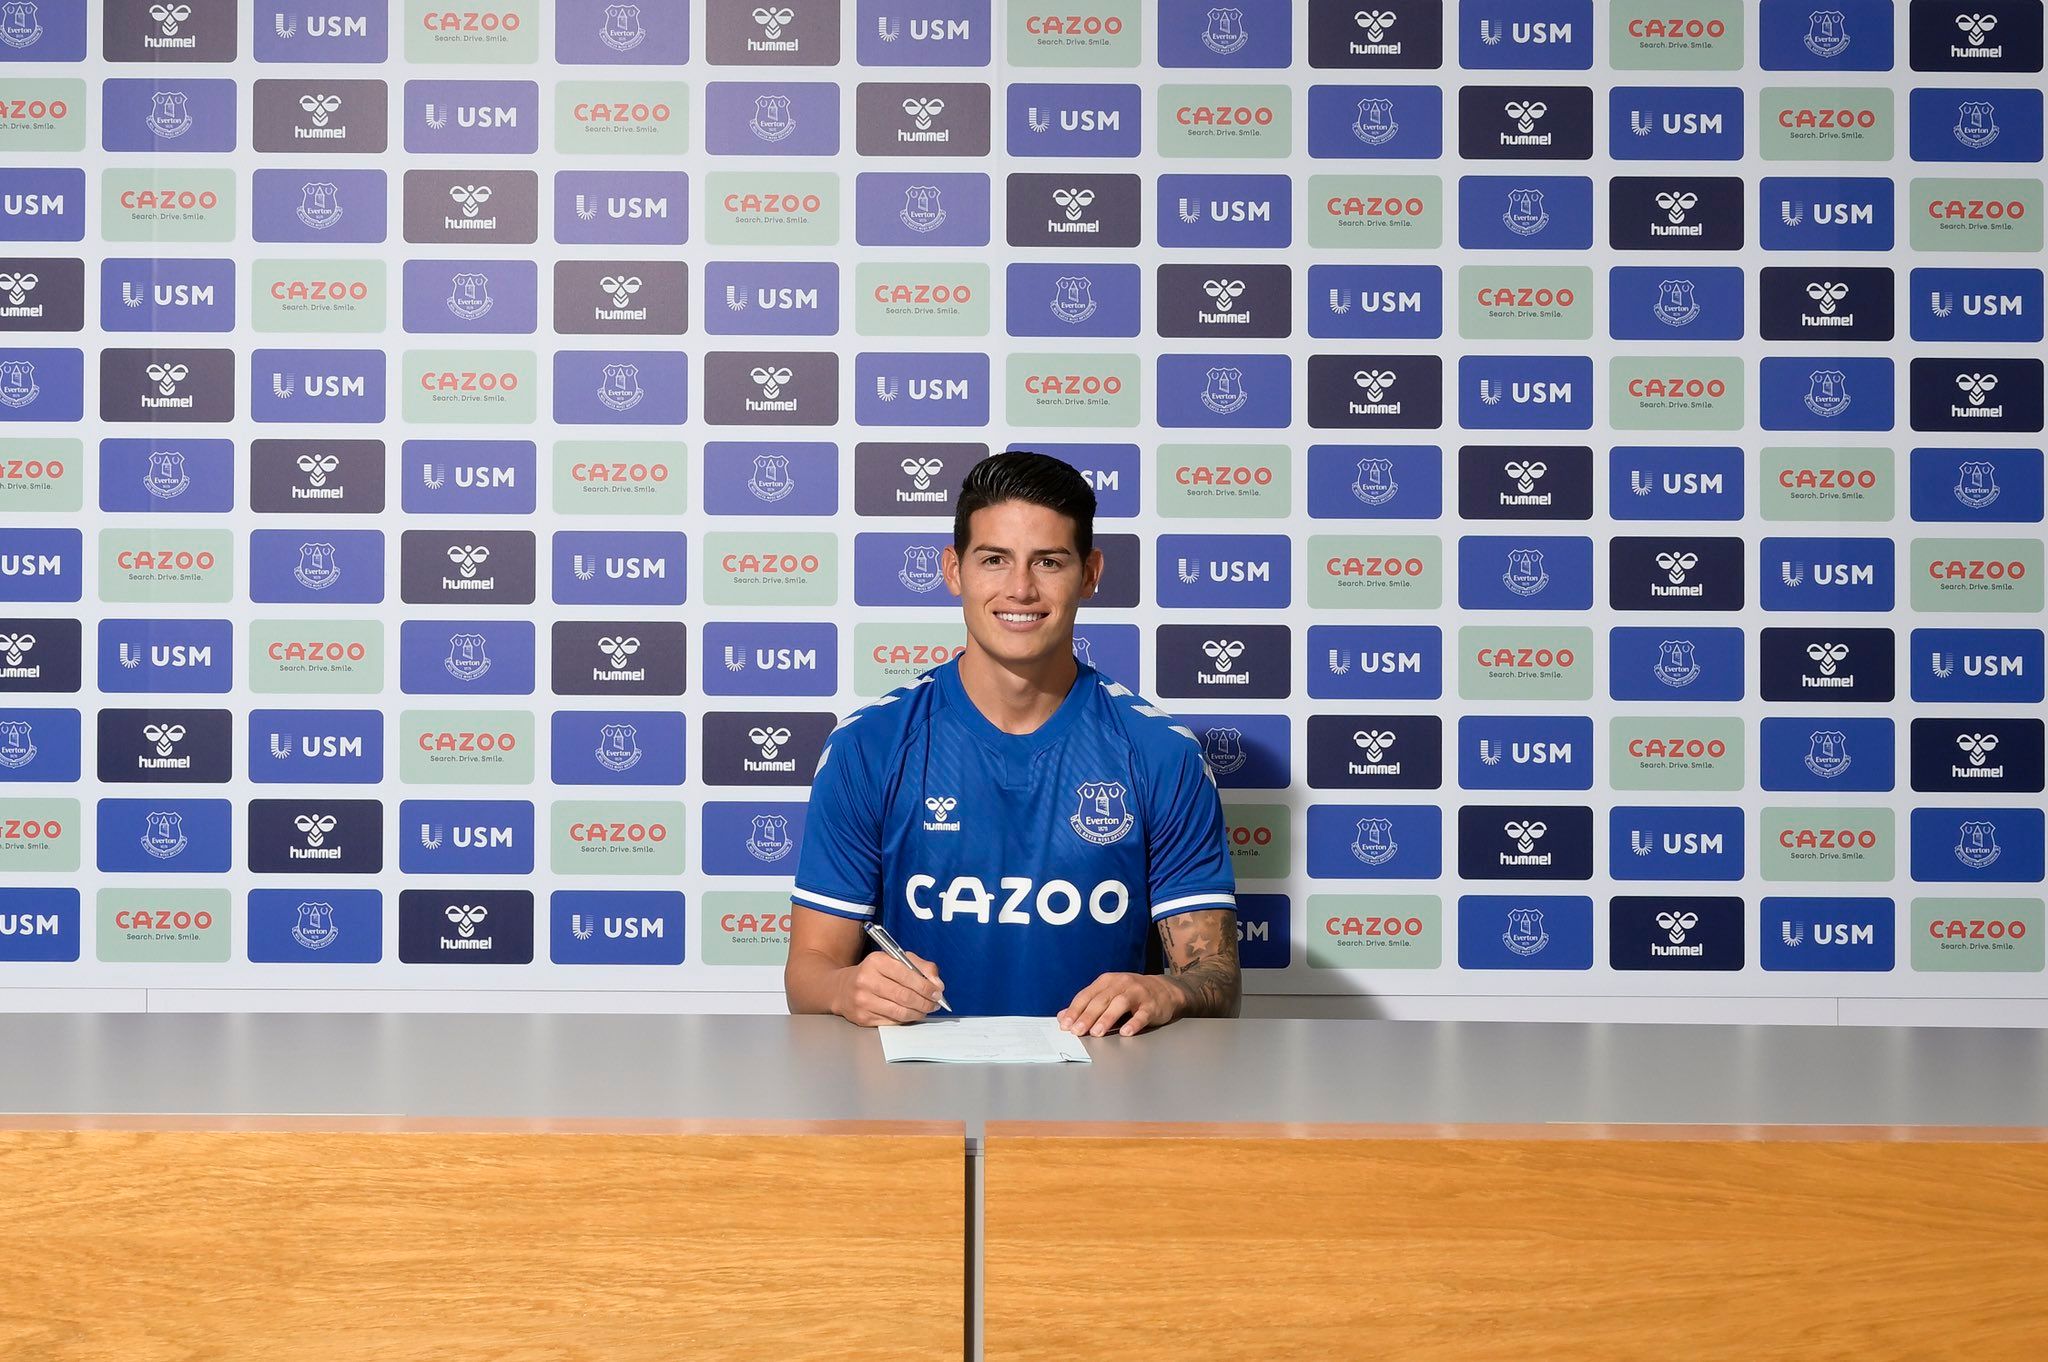 Premier League Football club Everton sign James Rodriguez from Real Madrid